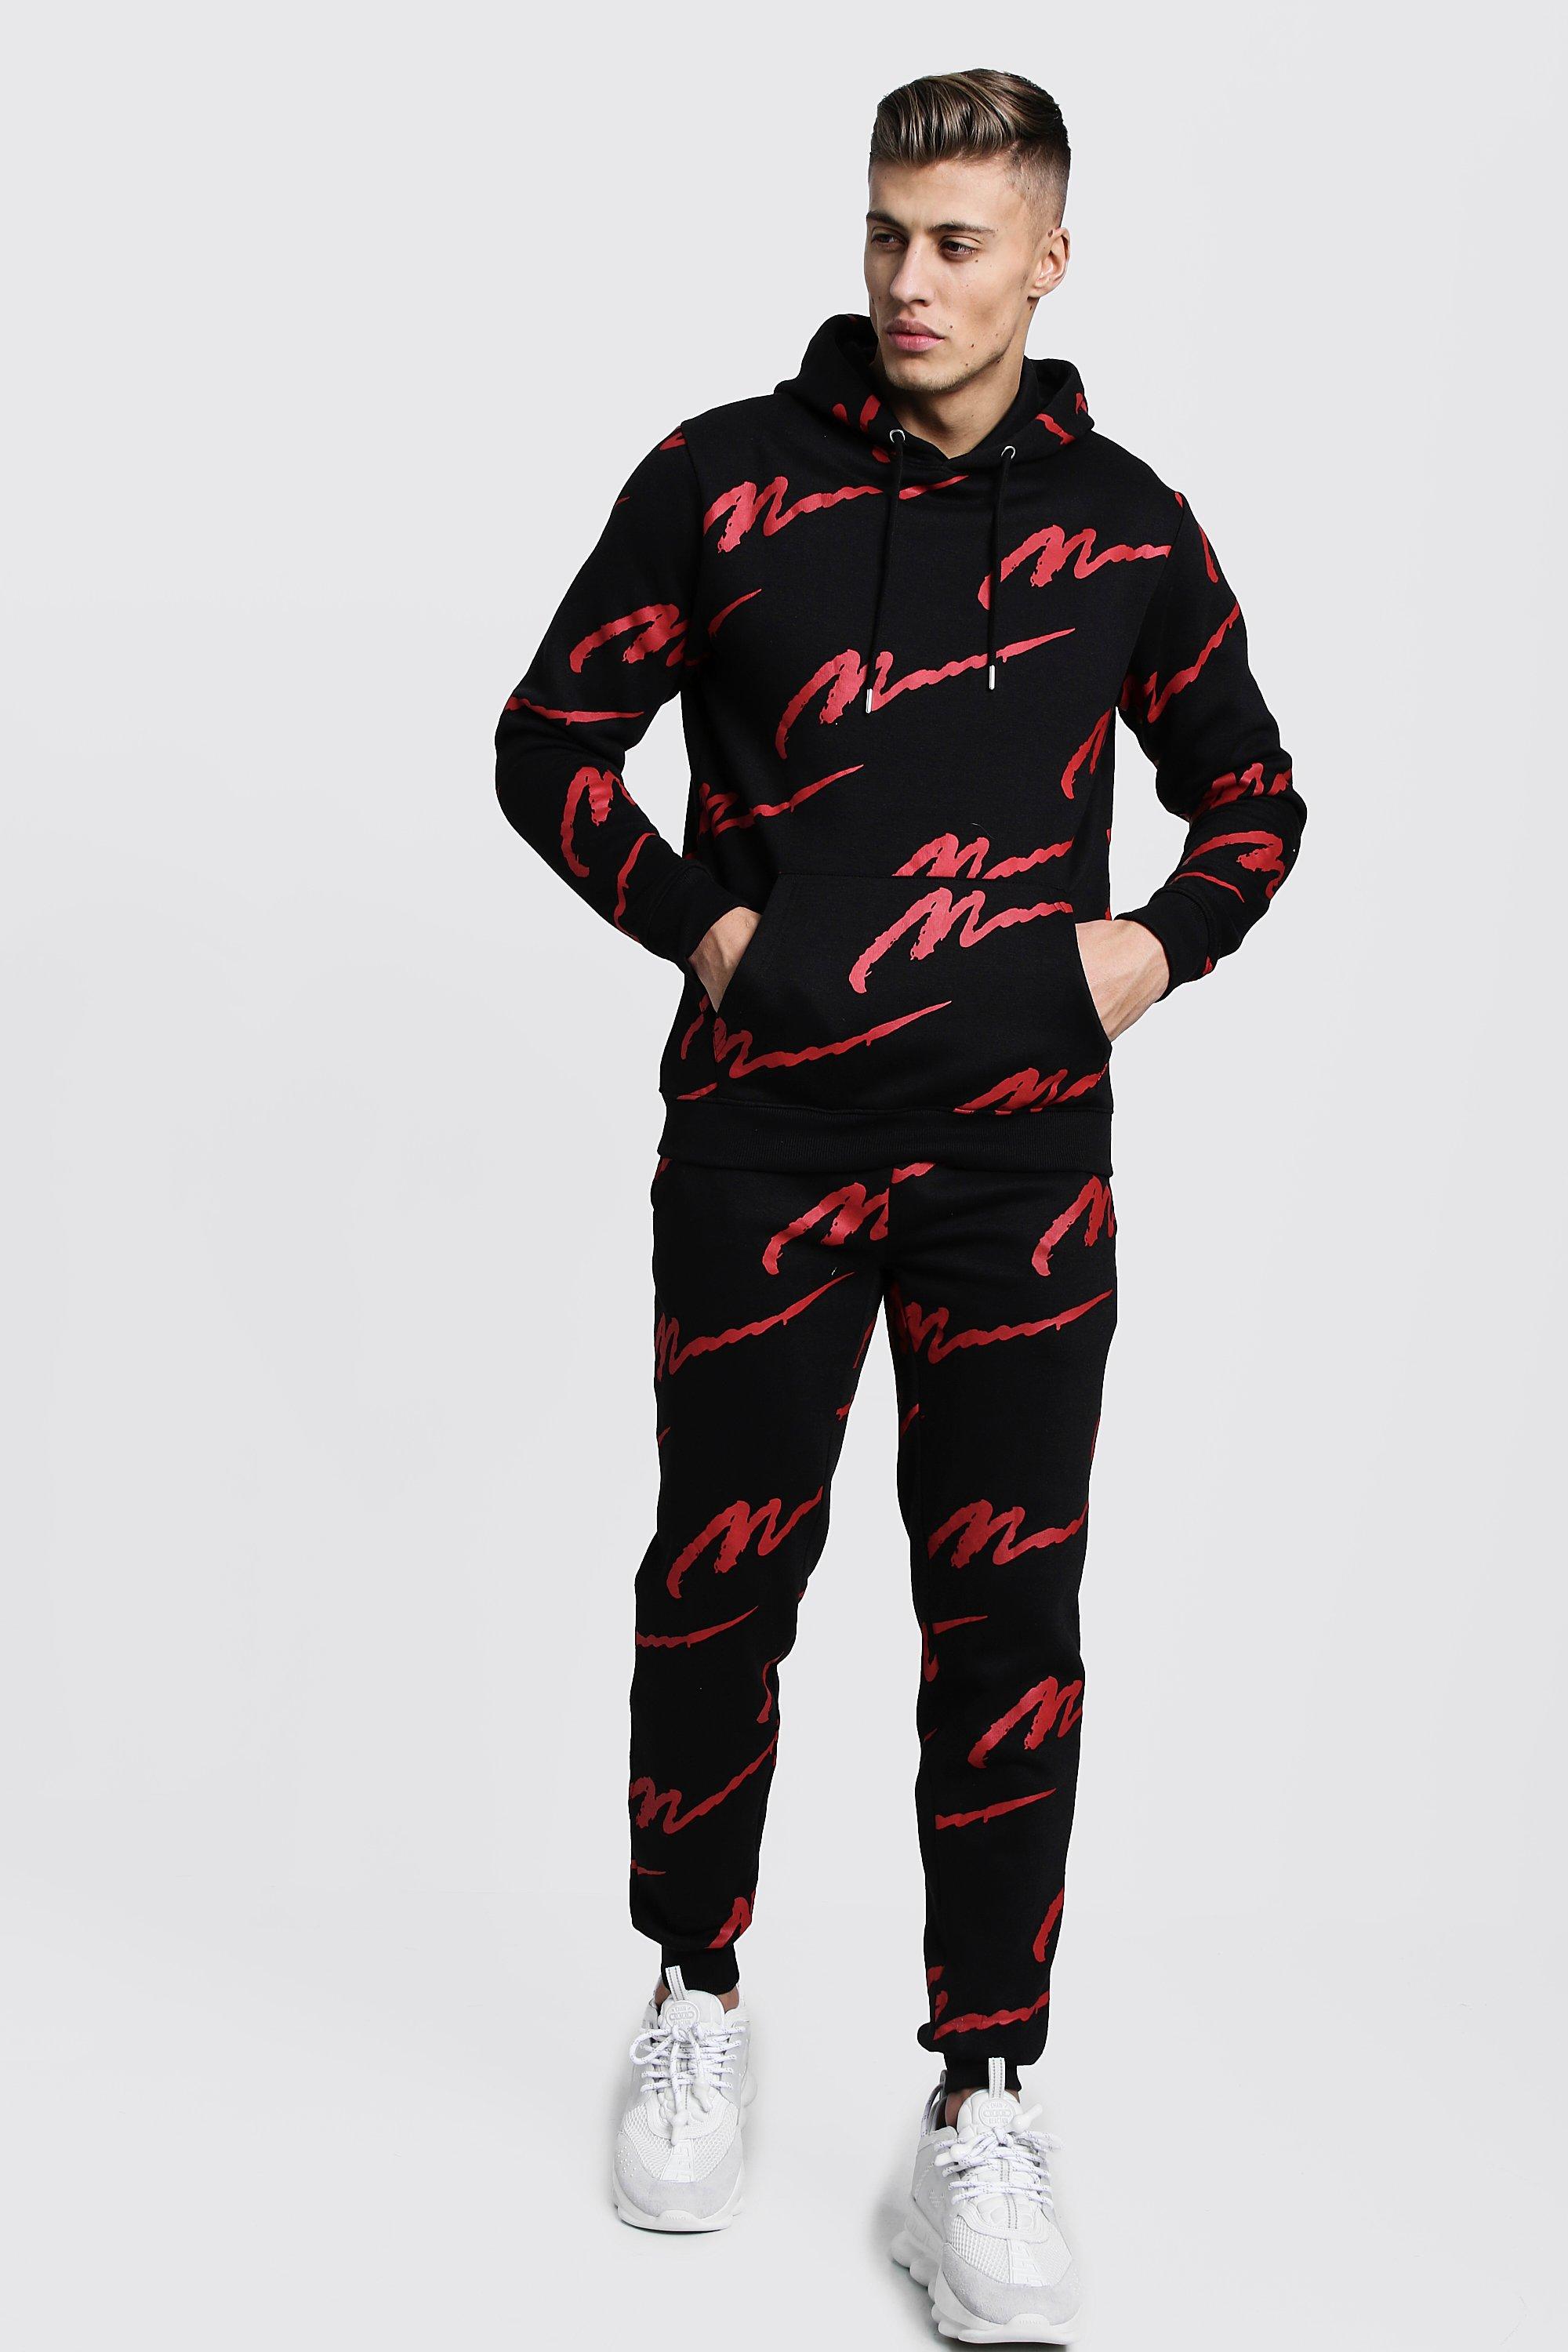 boohoo red tracksuit